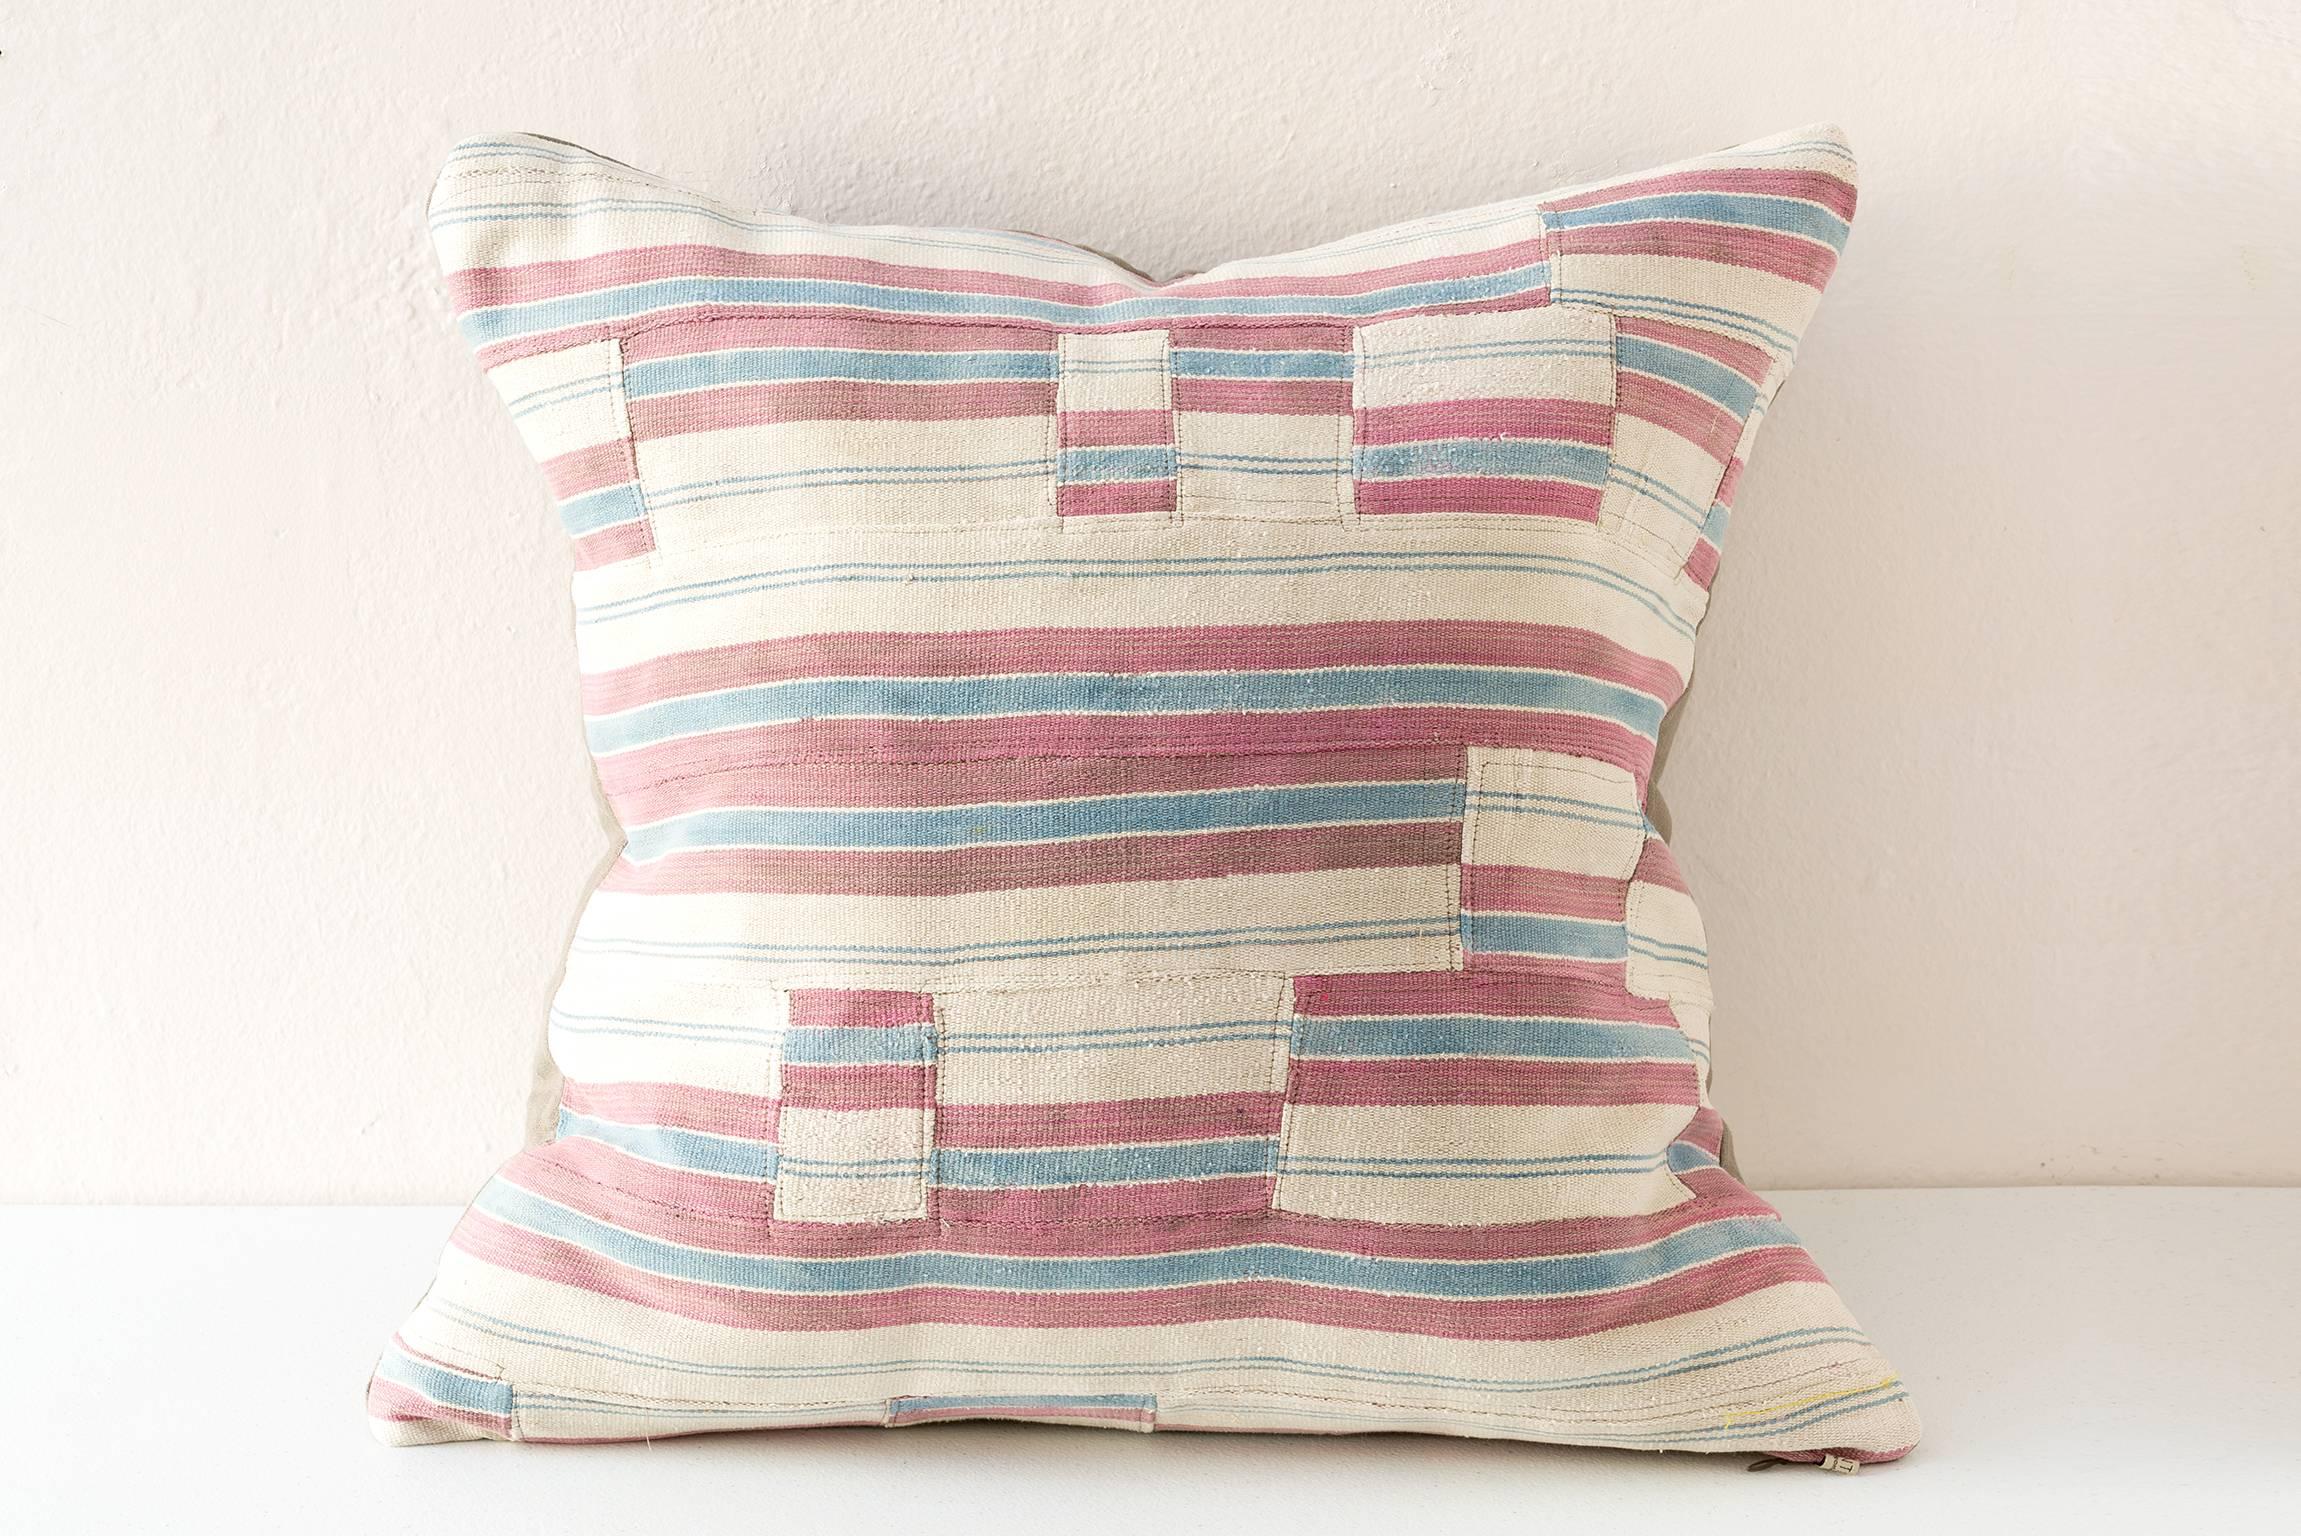 Hand-Woven Stripwoven Cloth Cushion Off-White, Blue and Mauve  For Sale